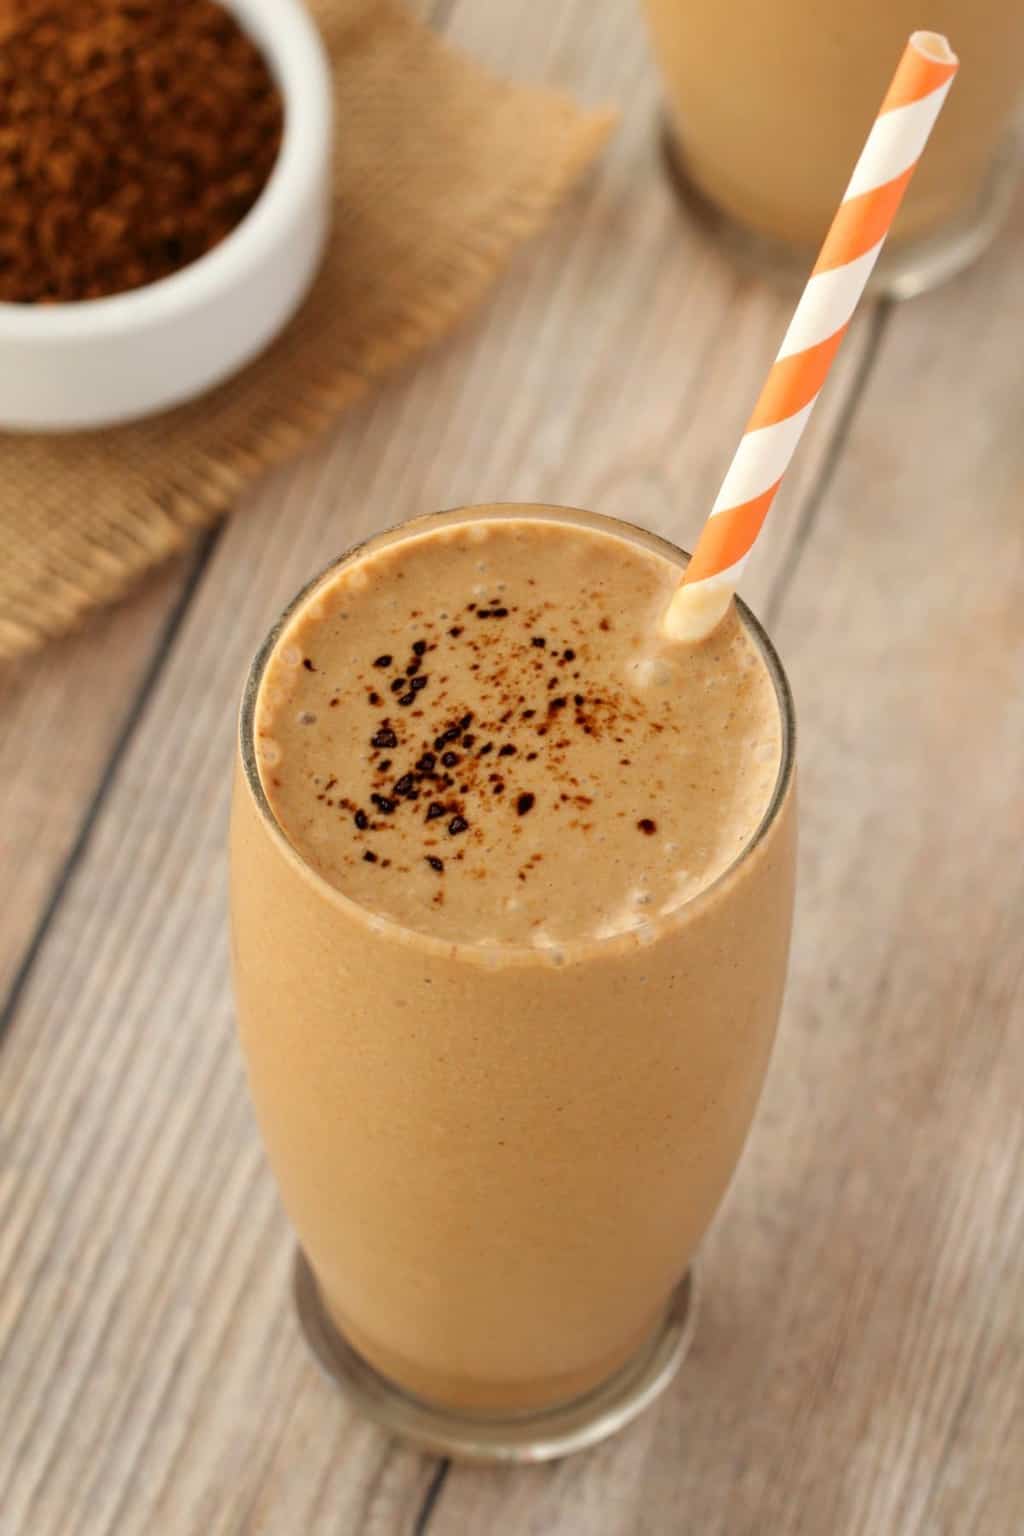 Vegan Coffee Smoothie in a glass with an orange and white striped straw.